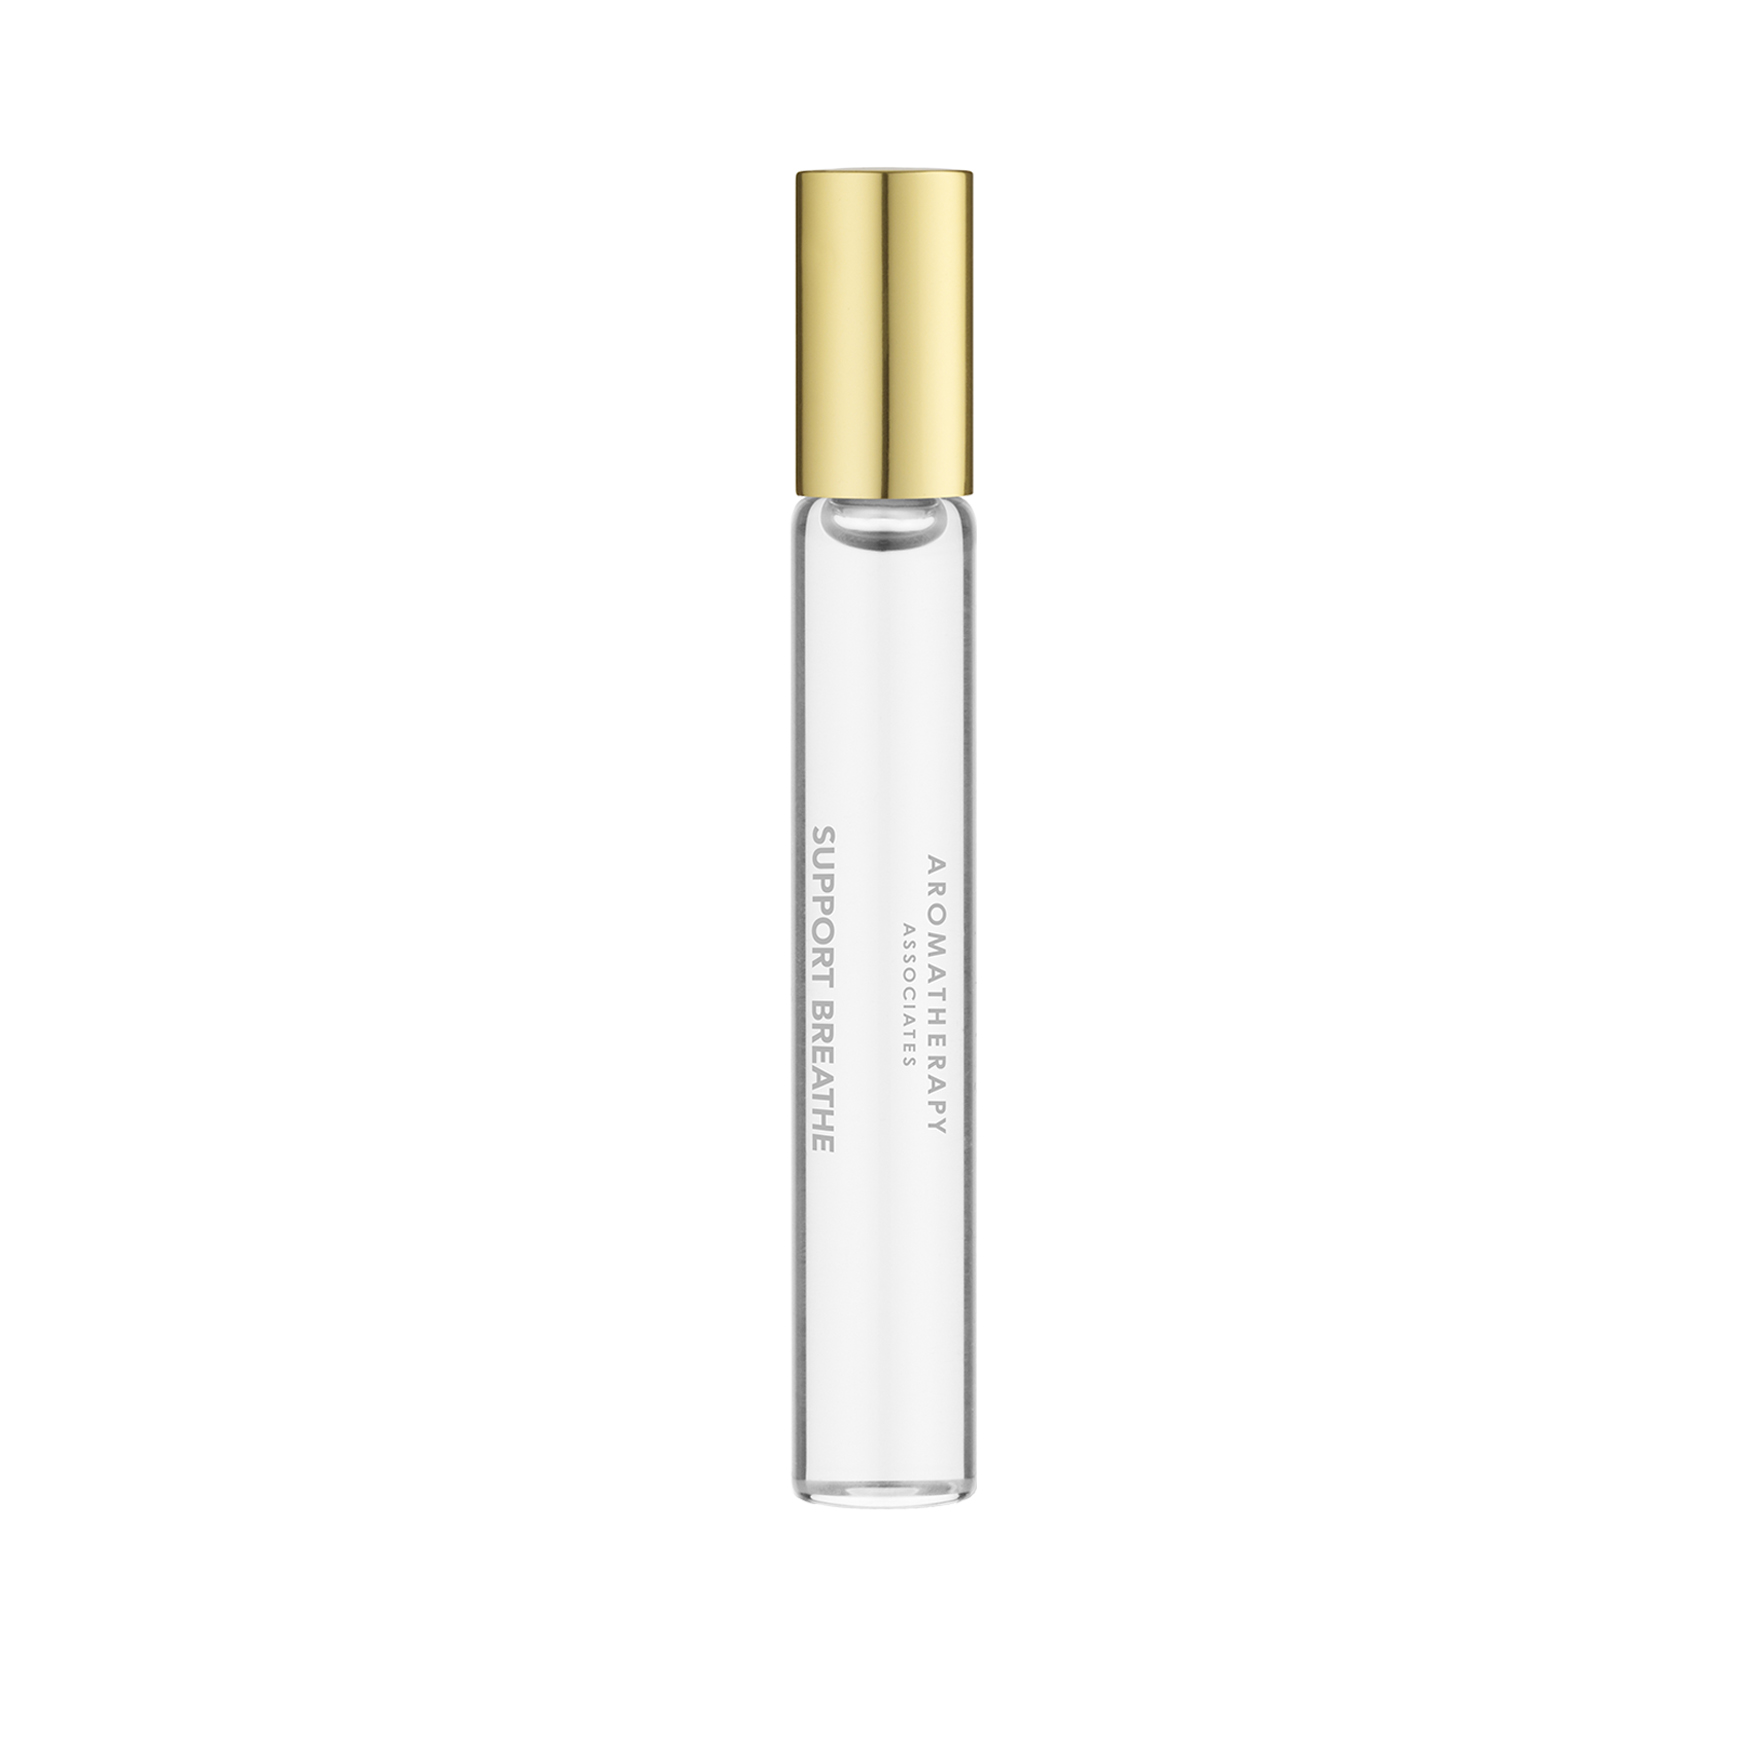 Aromatherapy Associates Support Breathe Roller Ball | Space NK